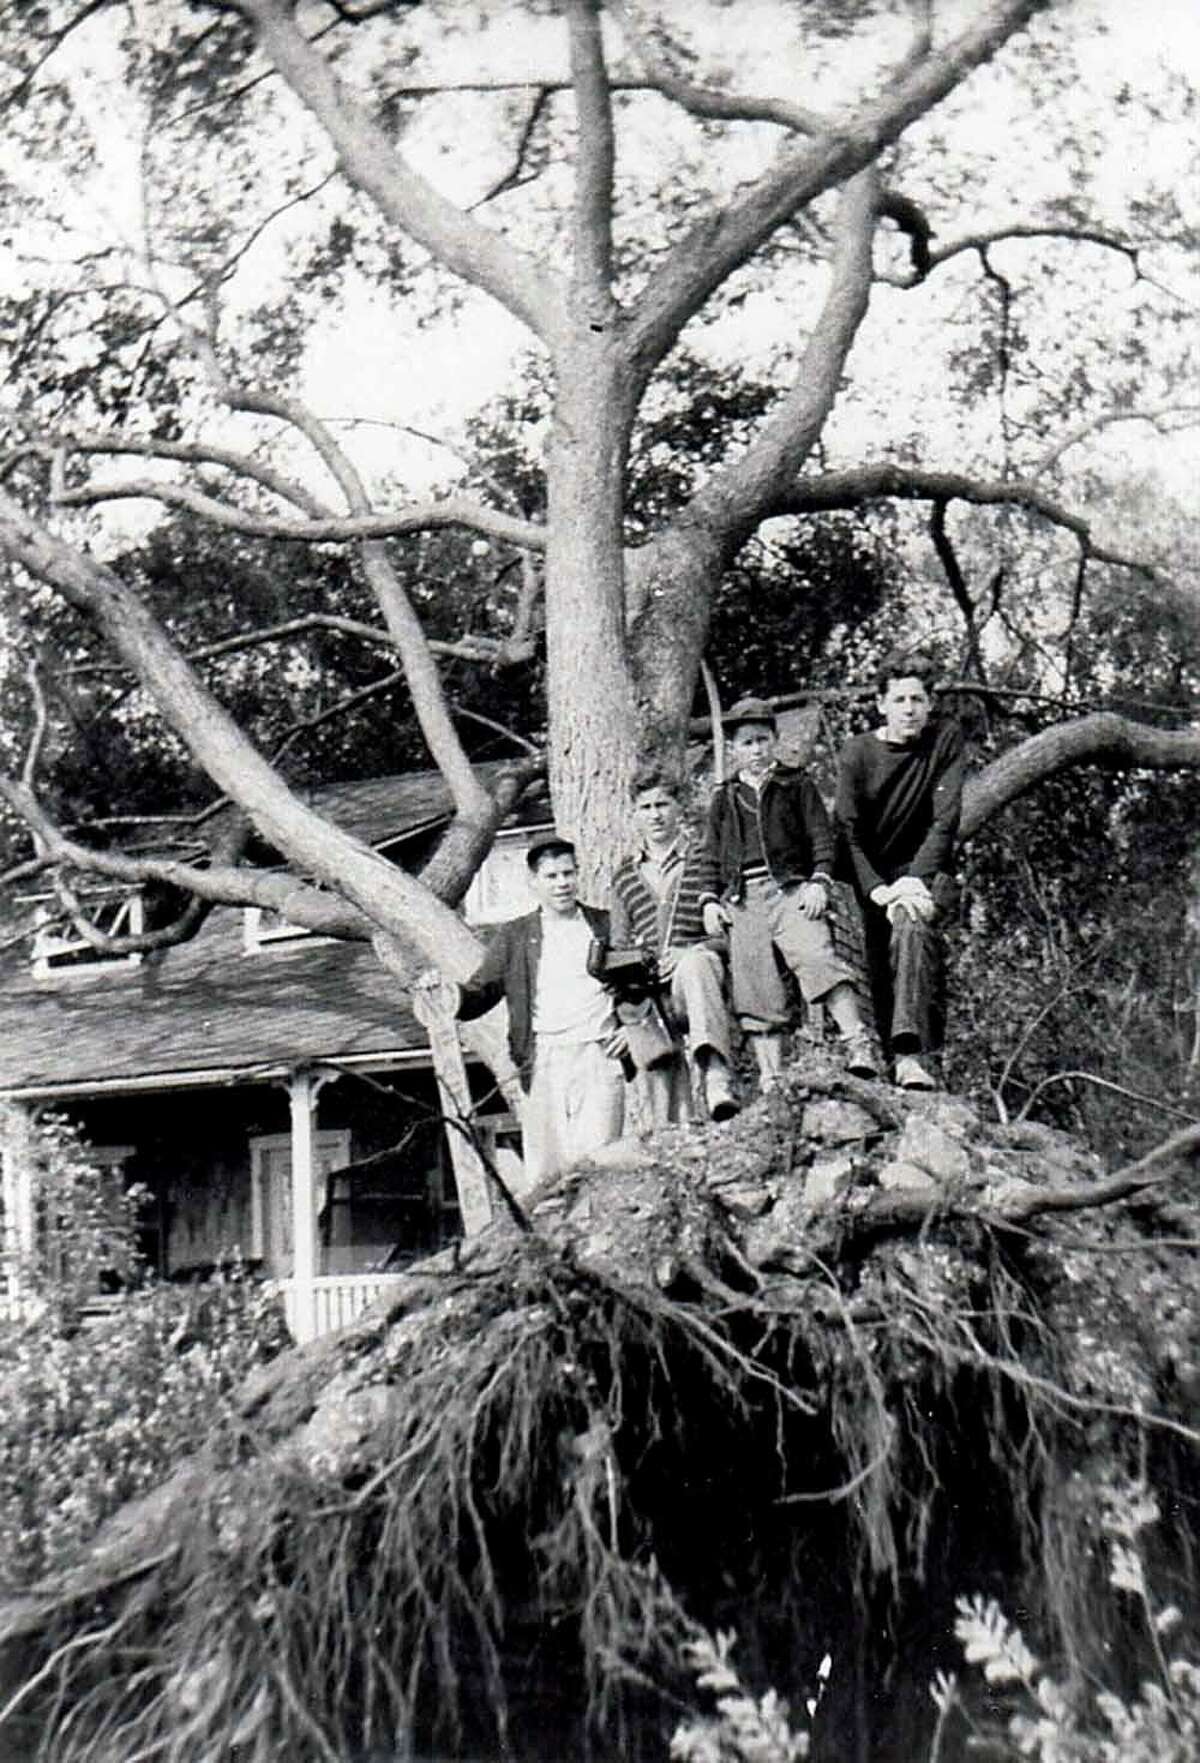 Stony Creek youth in the wake of the Hurricane of 1938.